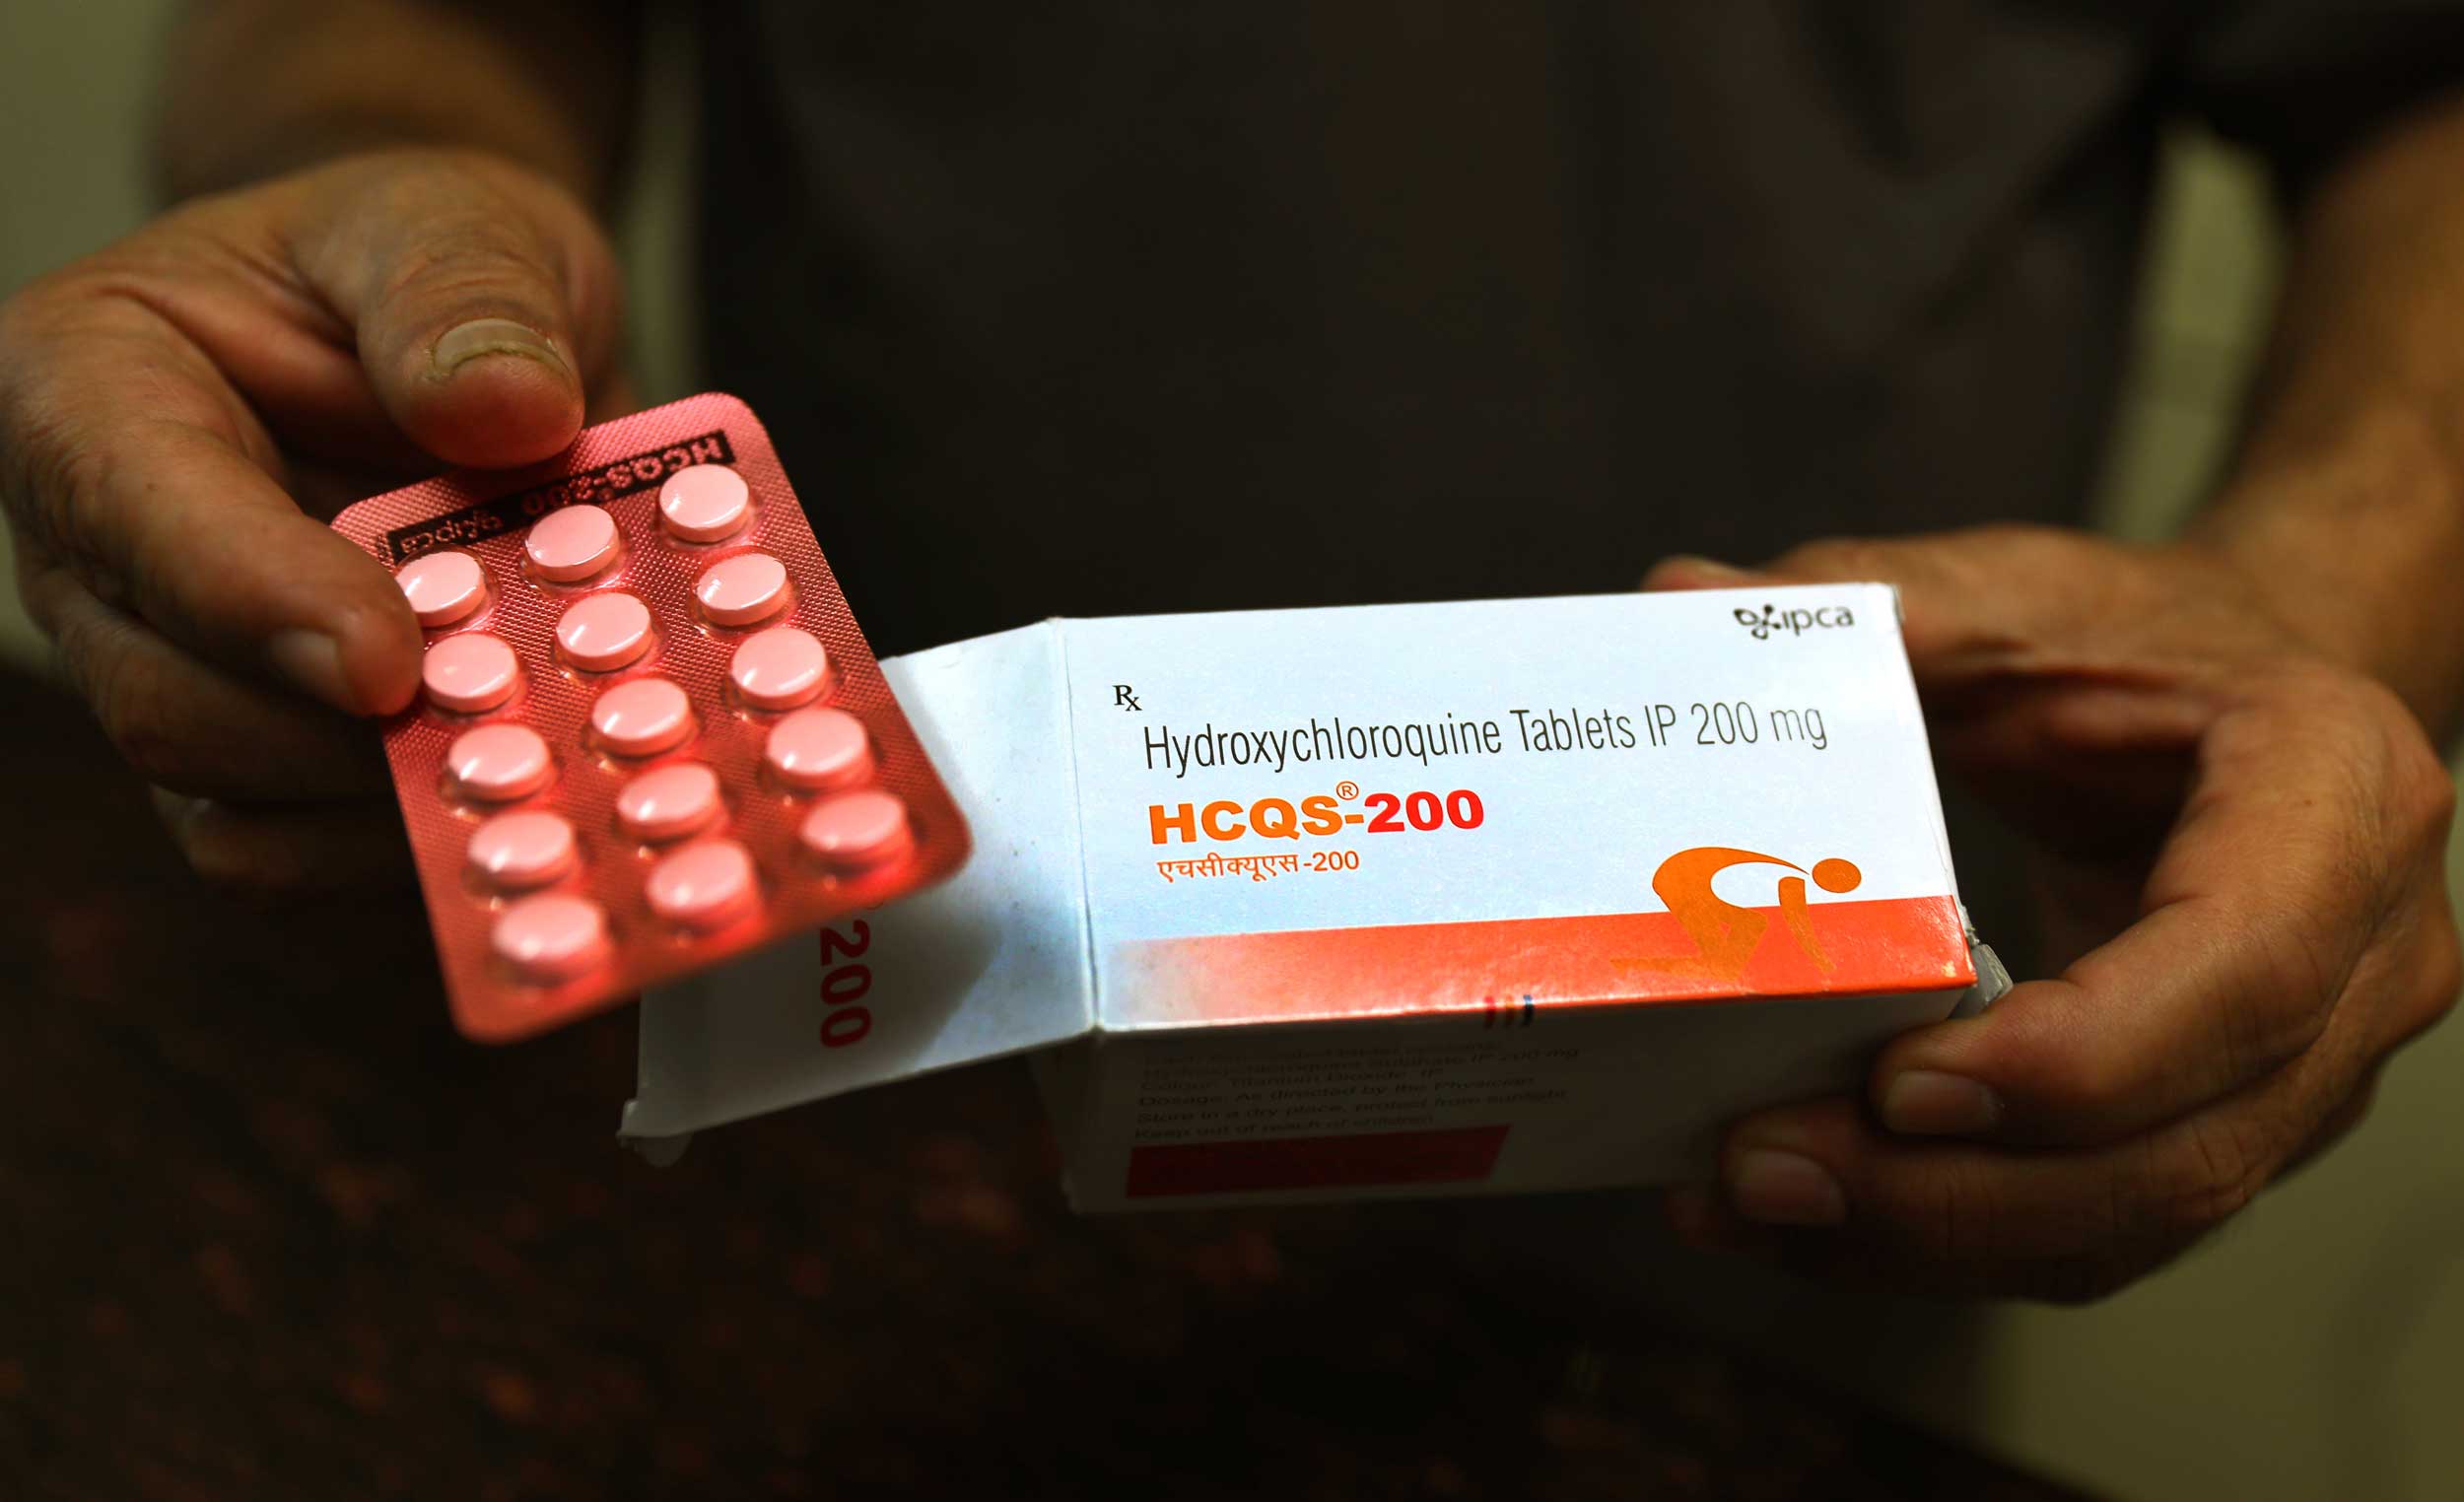 A chemist with hydroxychloroquine tablets